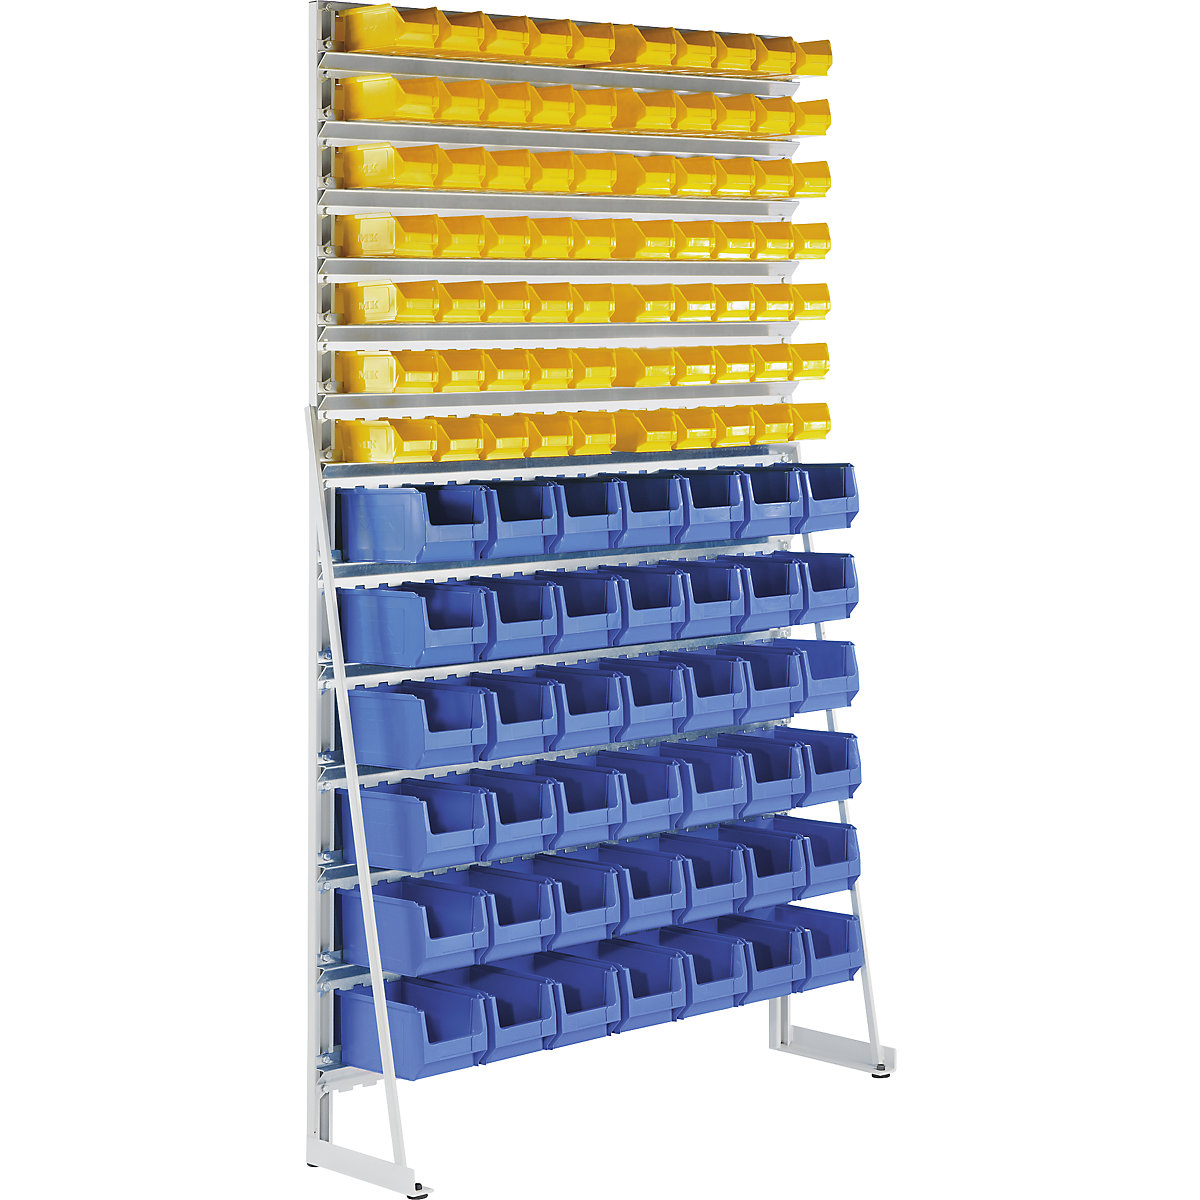 Free-standing small parts shelf unit with open fronted storage bins – eurokraft pro, single sided, with 140 open fronted storage bins-1